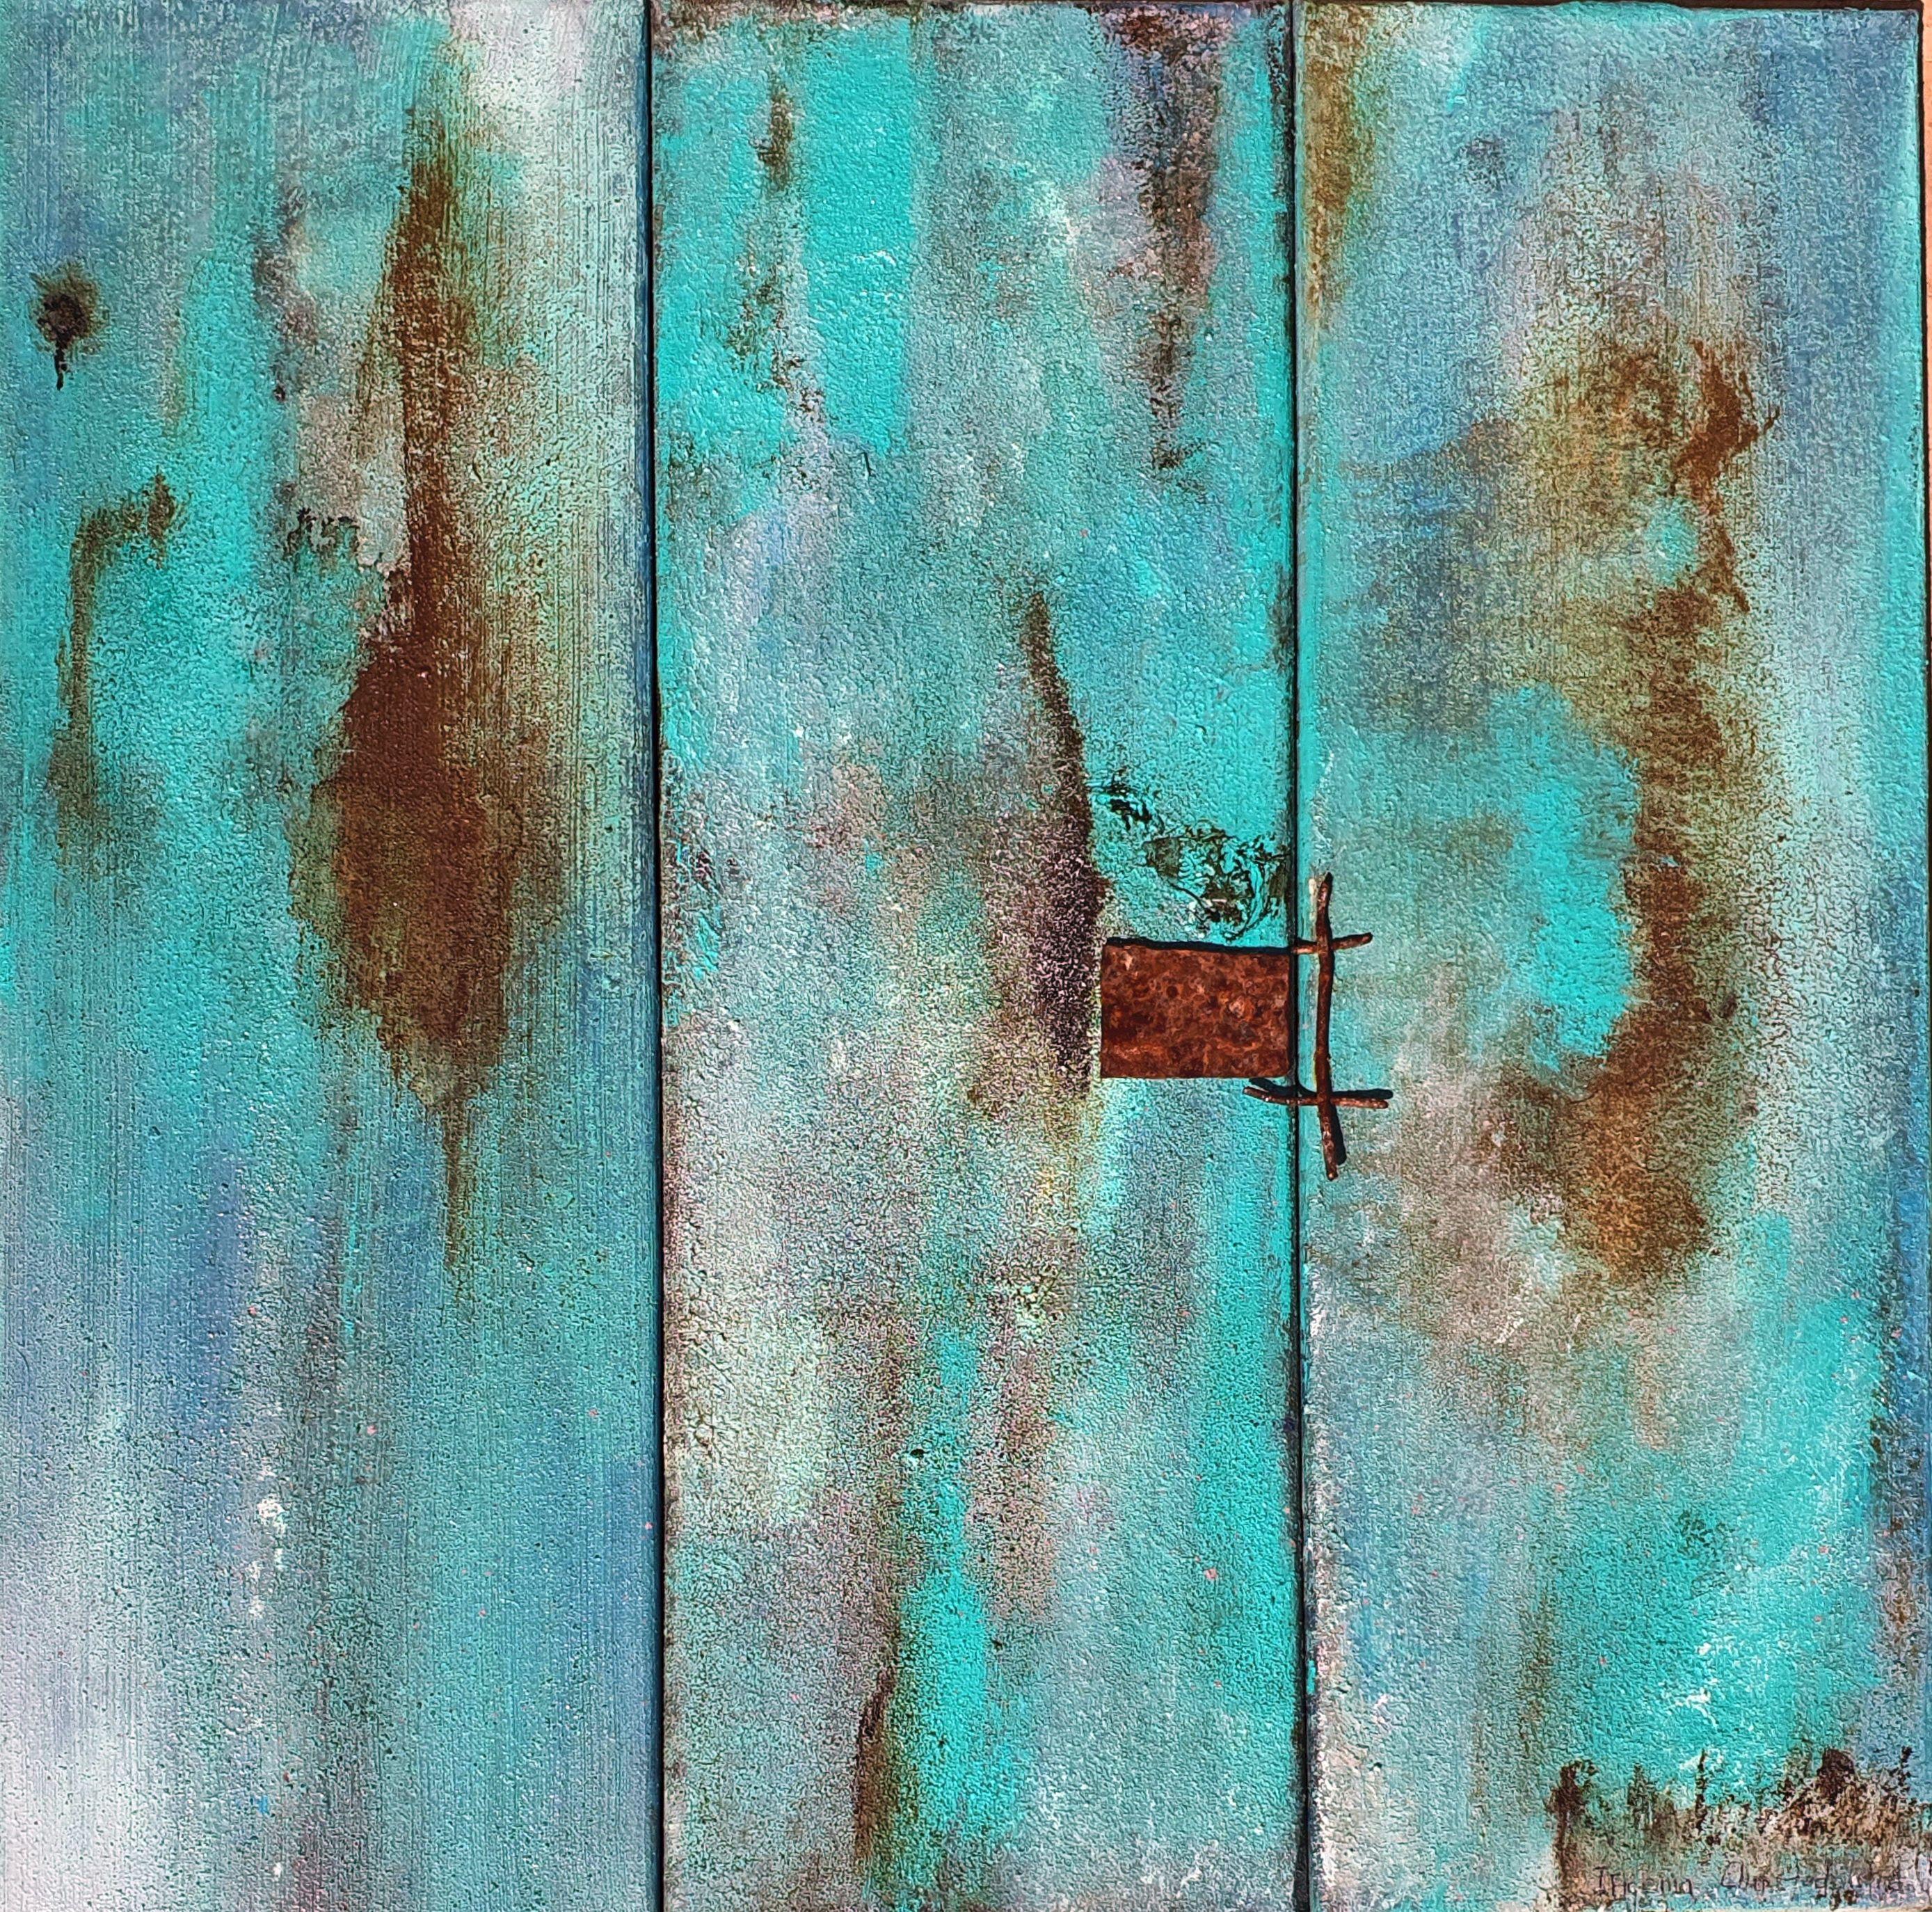 Ifigenia christodoulidou Abstract Painting - "Aegean Blues", Painting, Acrylic on Canvas